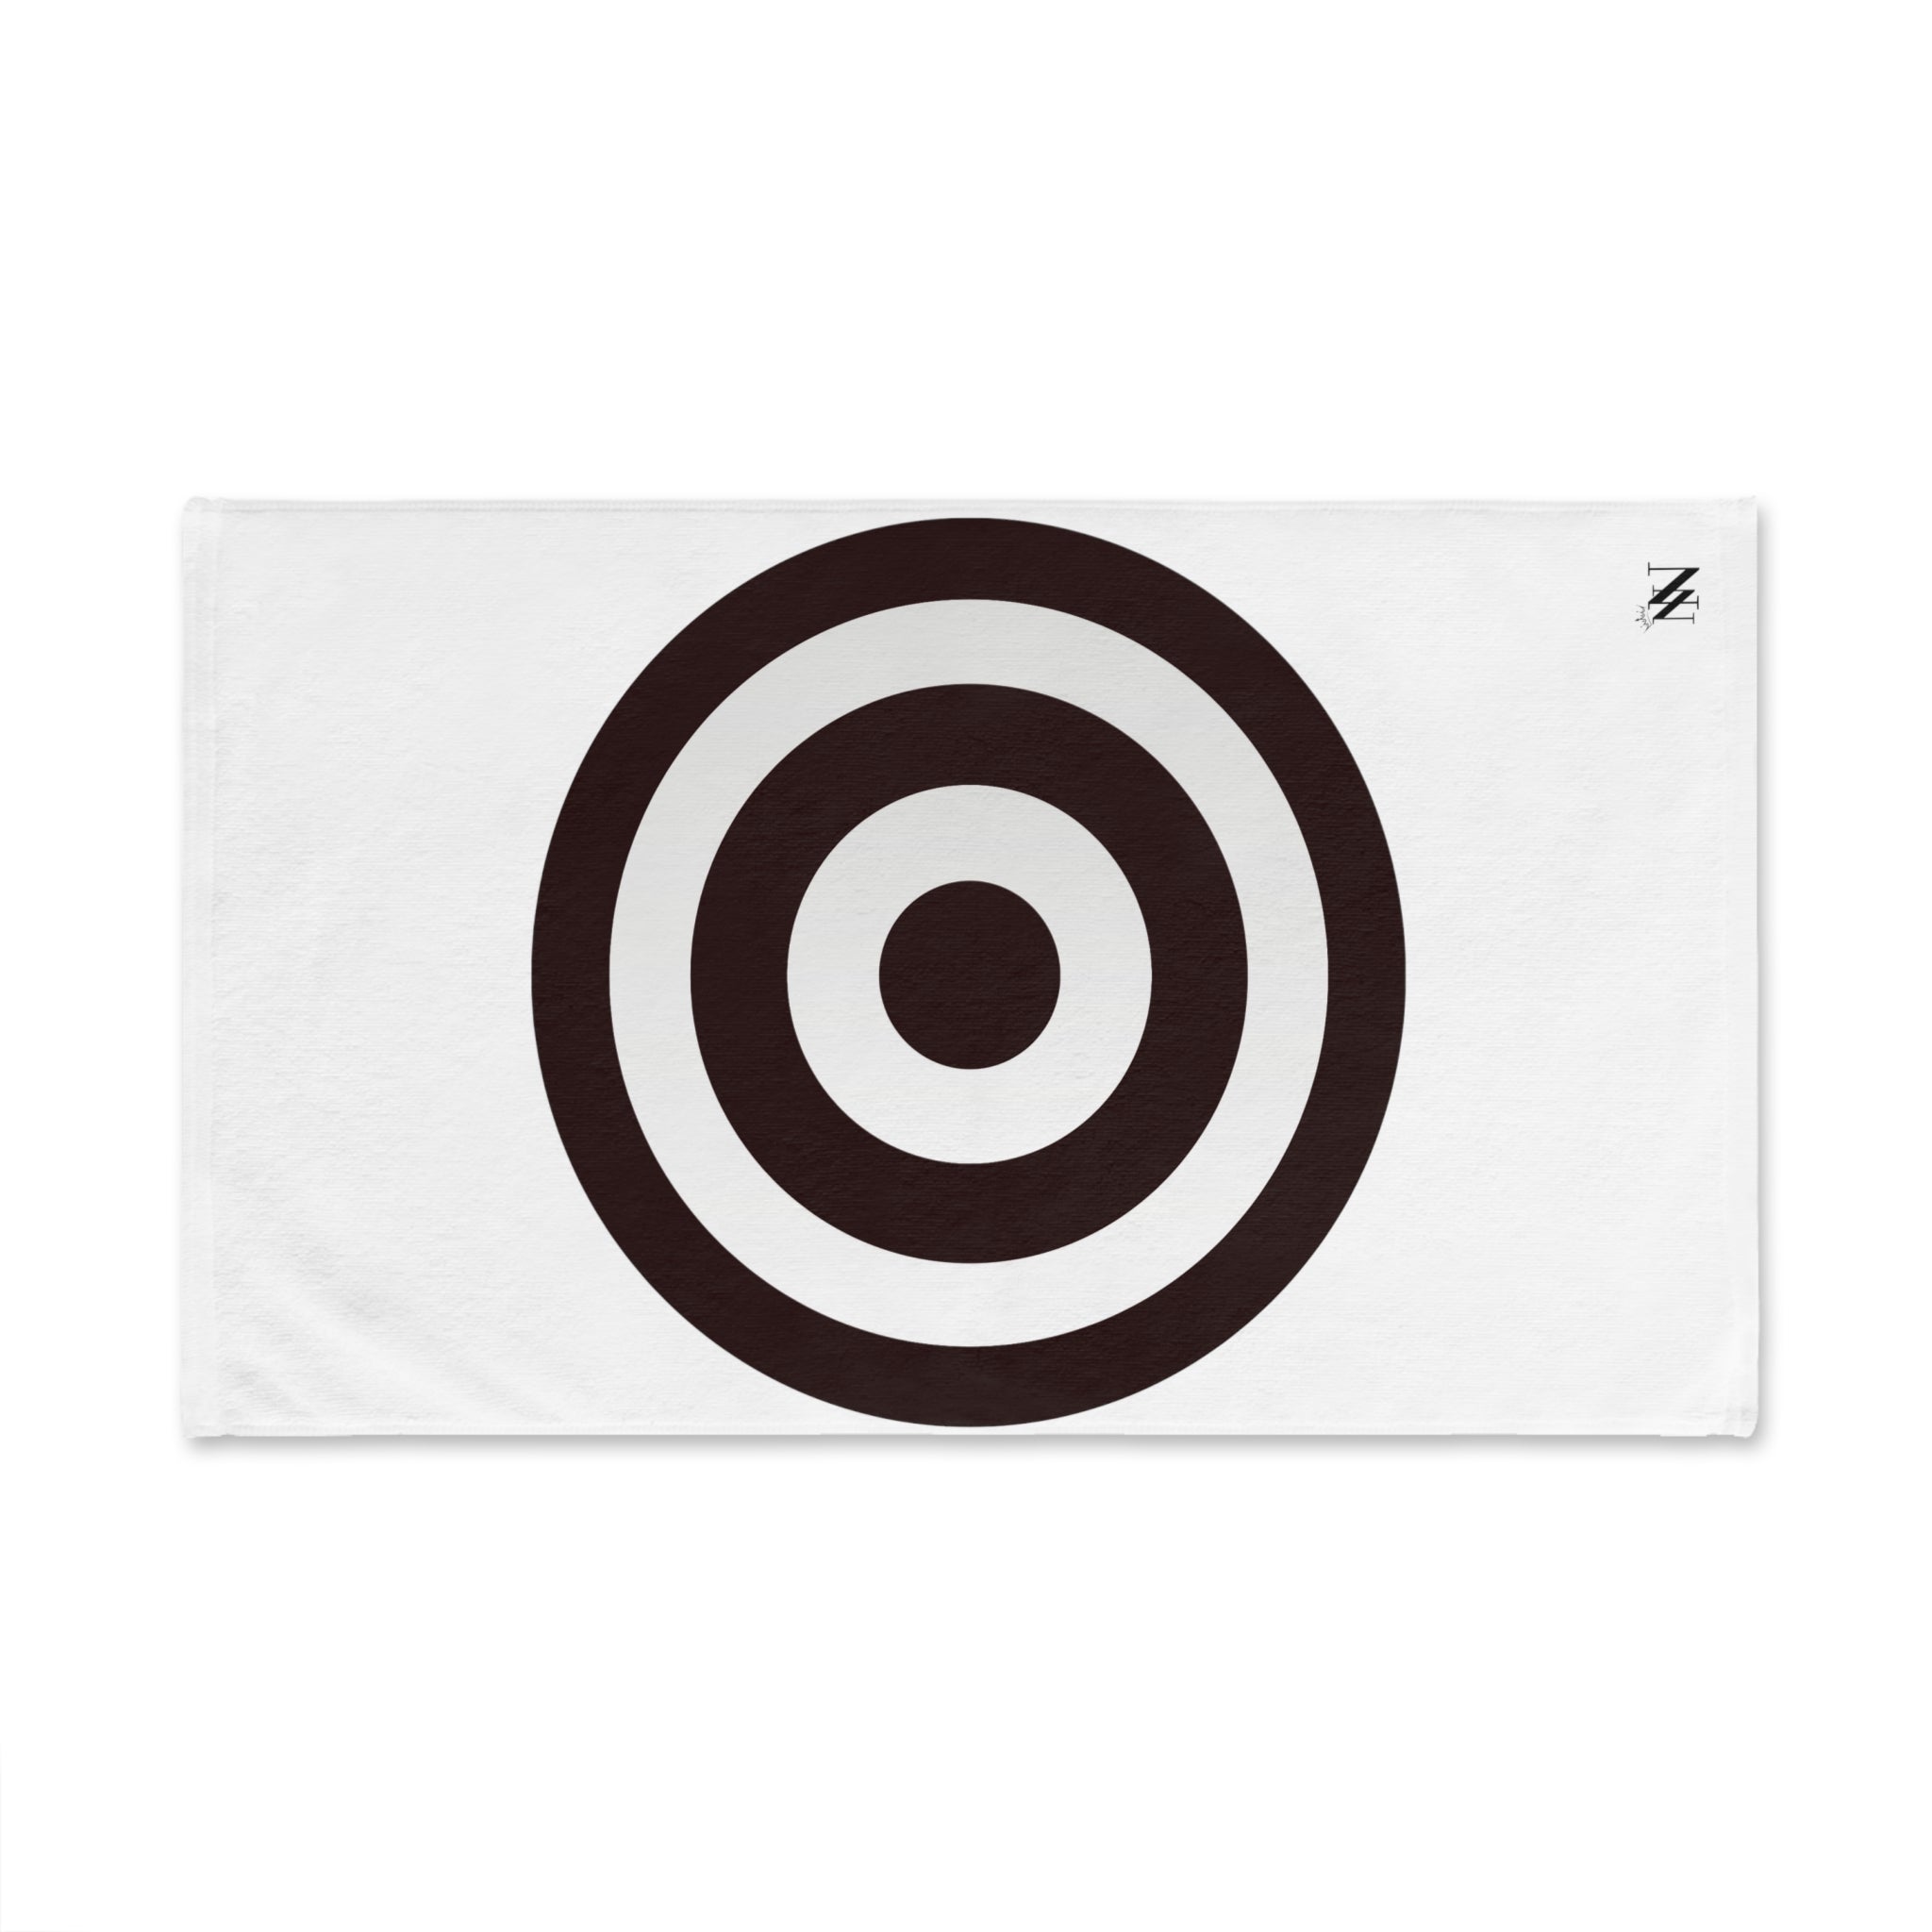 XL Black Bullseye White | Funny Gifts for Men - Gifts for Him - Birthday Gifts for Men, Him, Her, Husband, Boyfriend, Girlfriend, New Couple Gifts, Fathers & Valentines Day Gifts, Christmas Gifts NECTAR NAPKINS